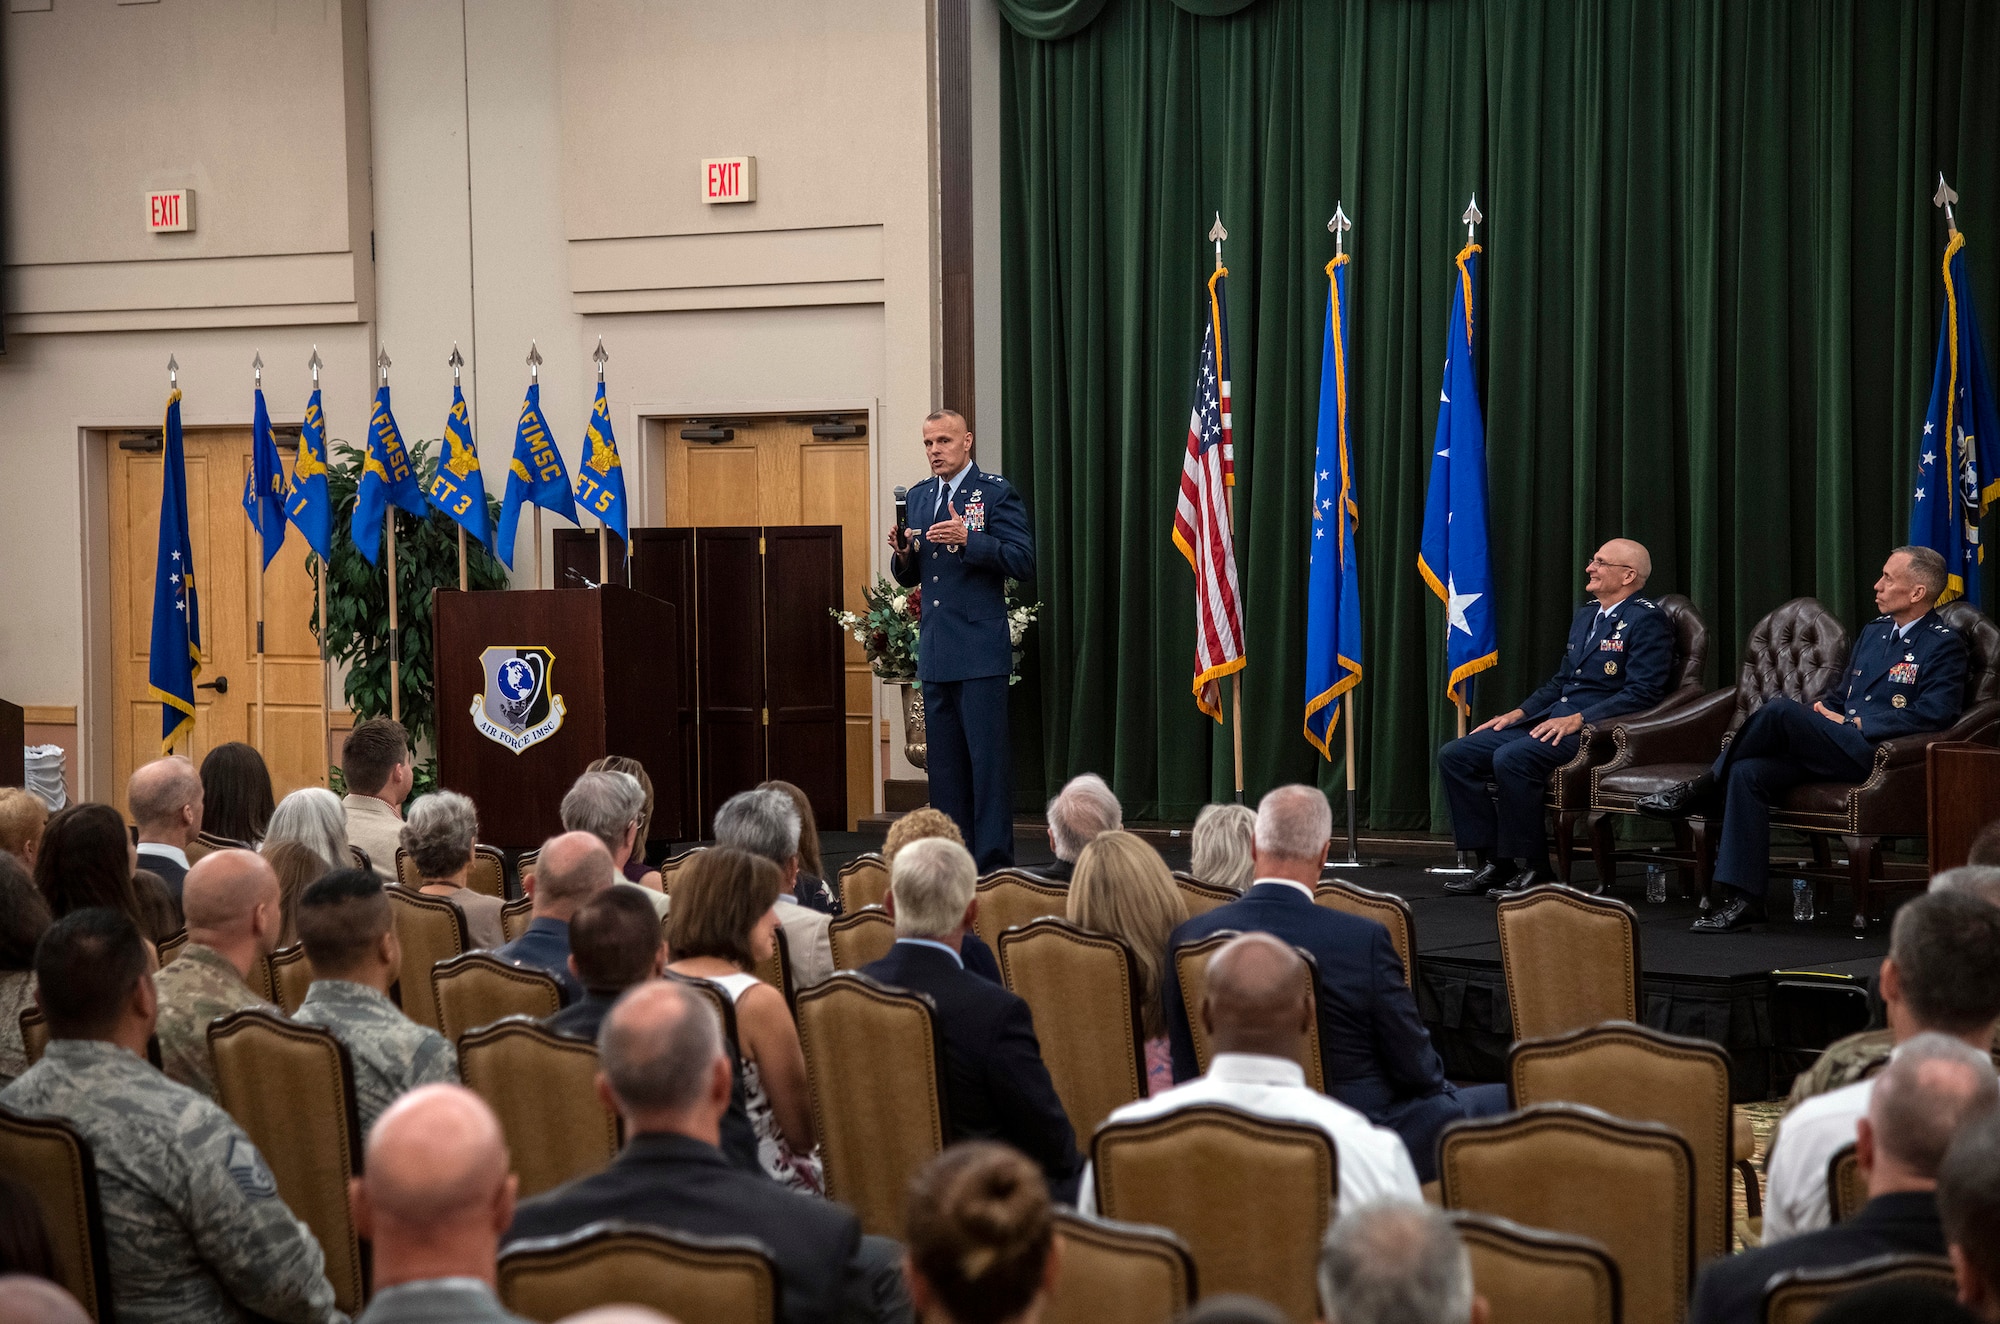 Maj. Gen. Brad Spacy, outgoing Air Force Installation and Mission Support Center commander, addresses the audience during the AFIMSC change of command July 25 at Joint Base San Antonio-Lackland. The general is retiring after 32 years of service. (U.S. Air Force photo by Johnny Saldivar)